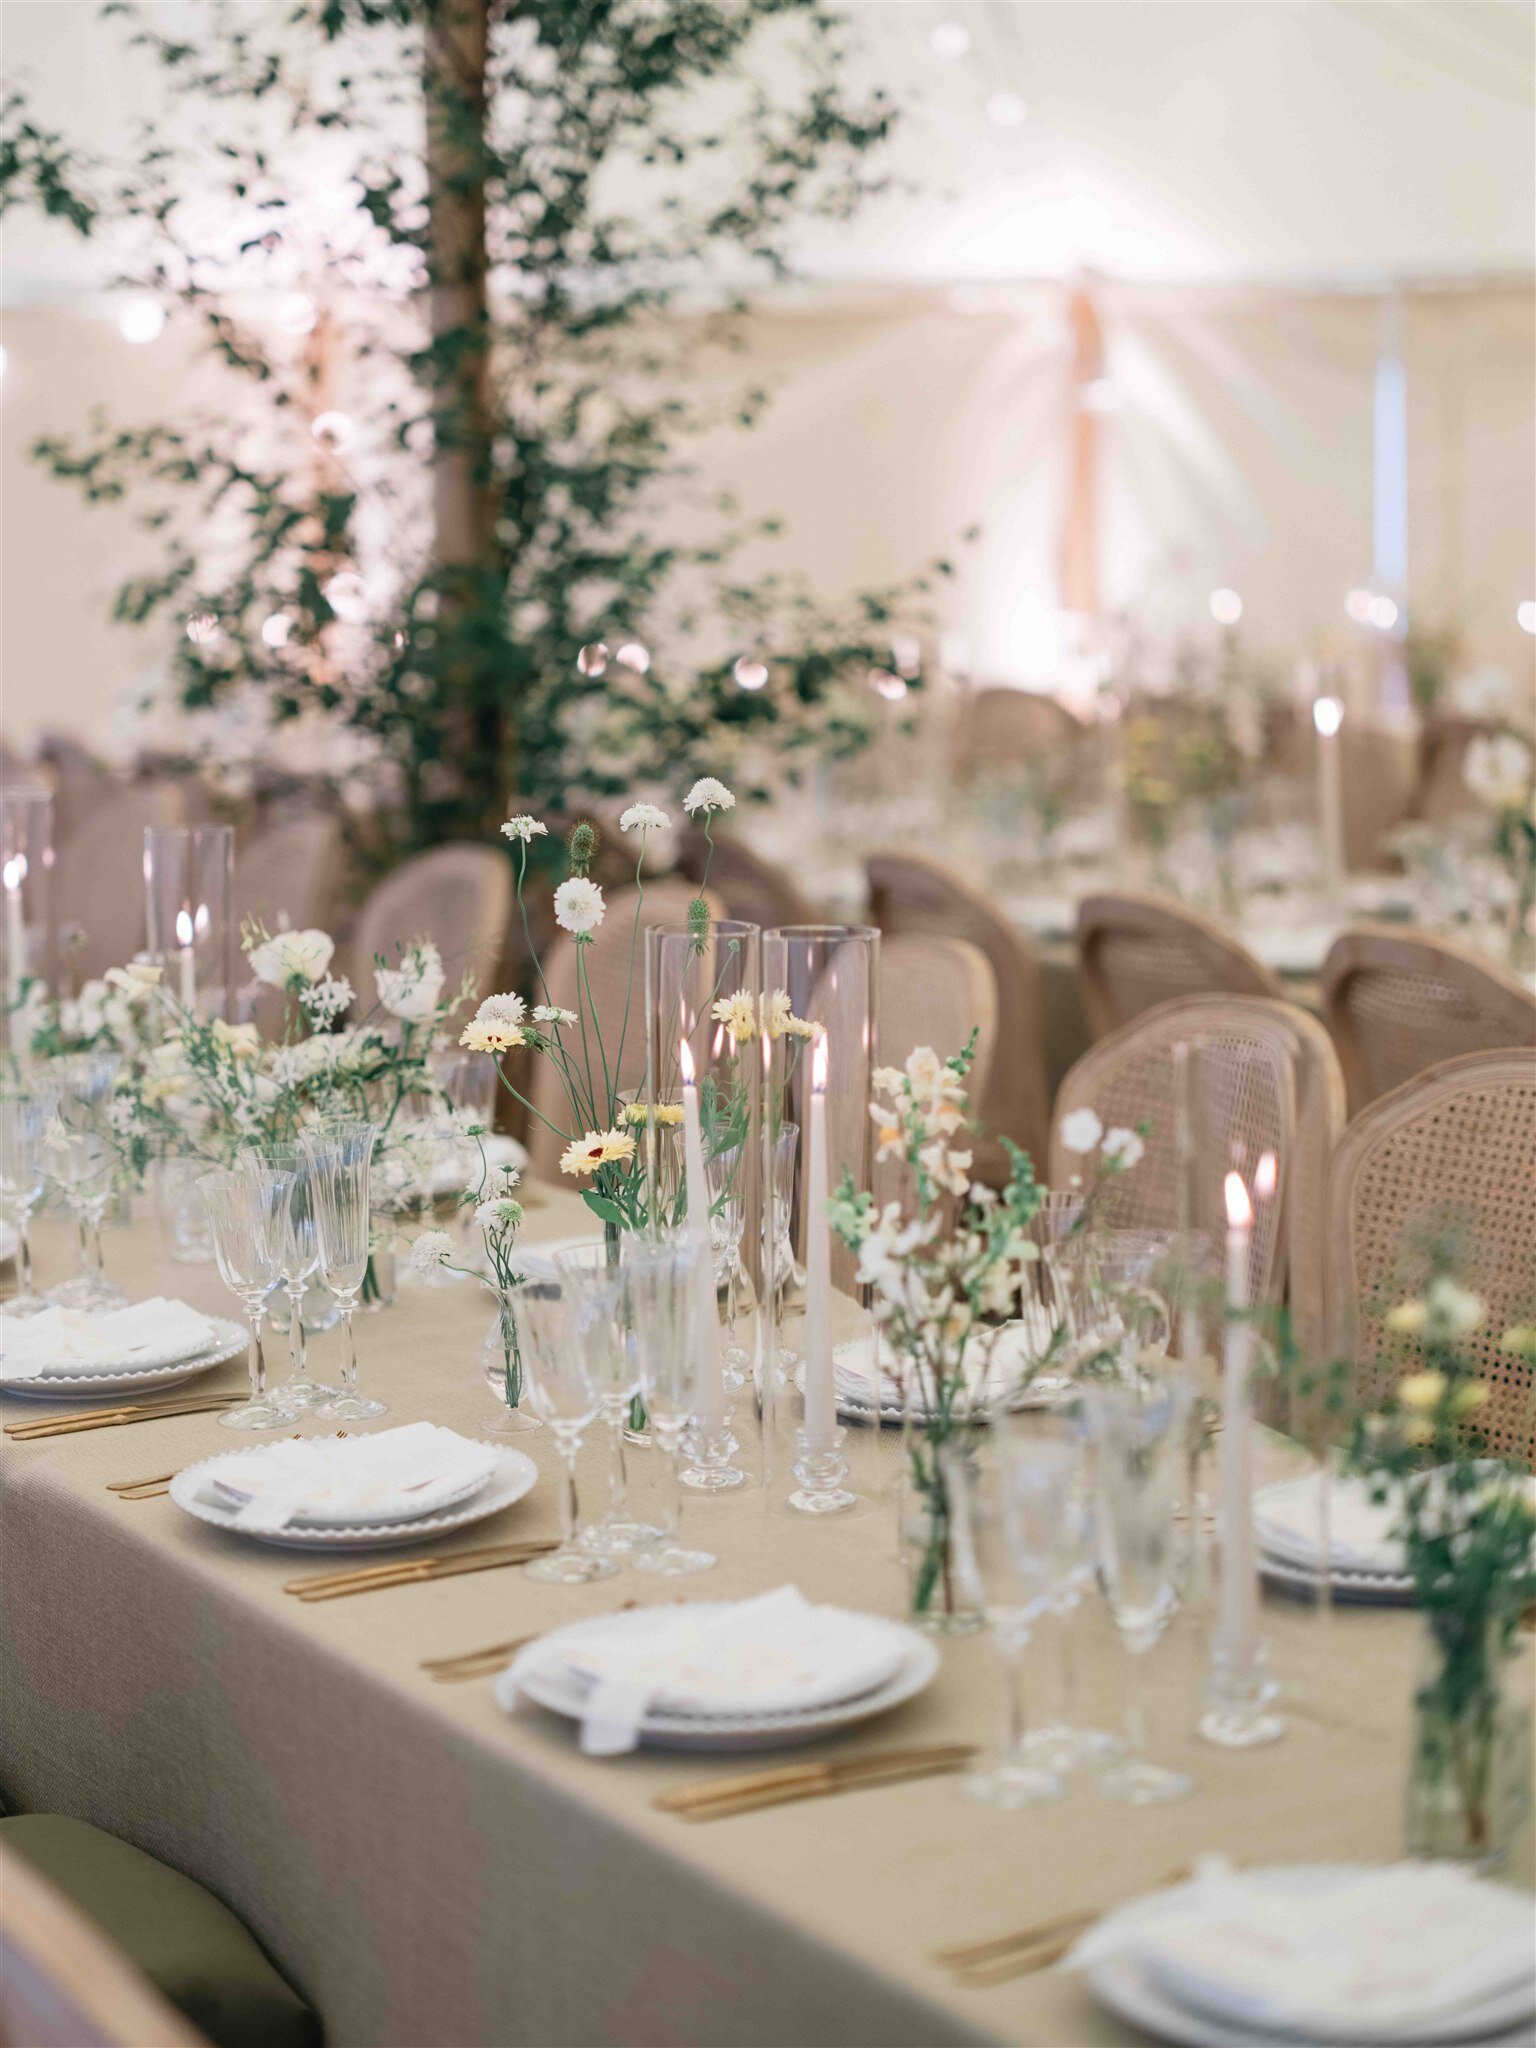 Attabara Studio UK Luxury Wedding Planners Private Estate Marquee Wedding with Stories from Eros_0659